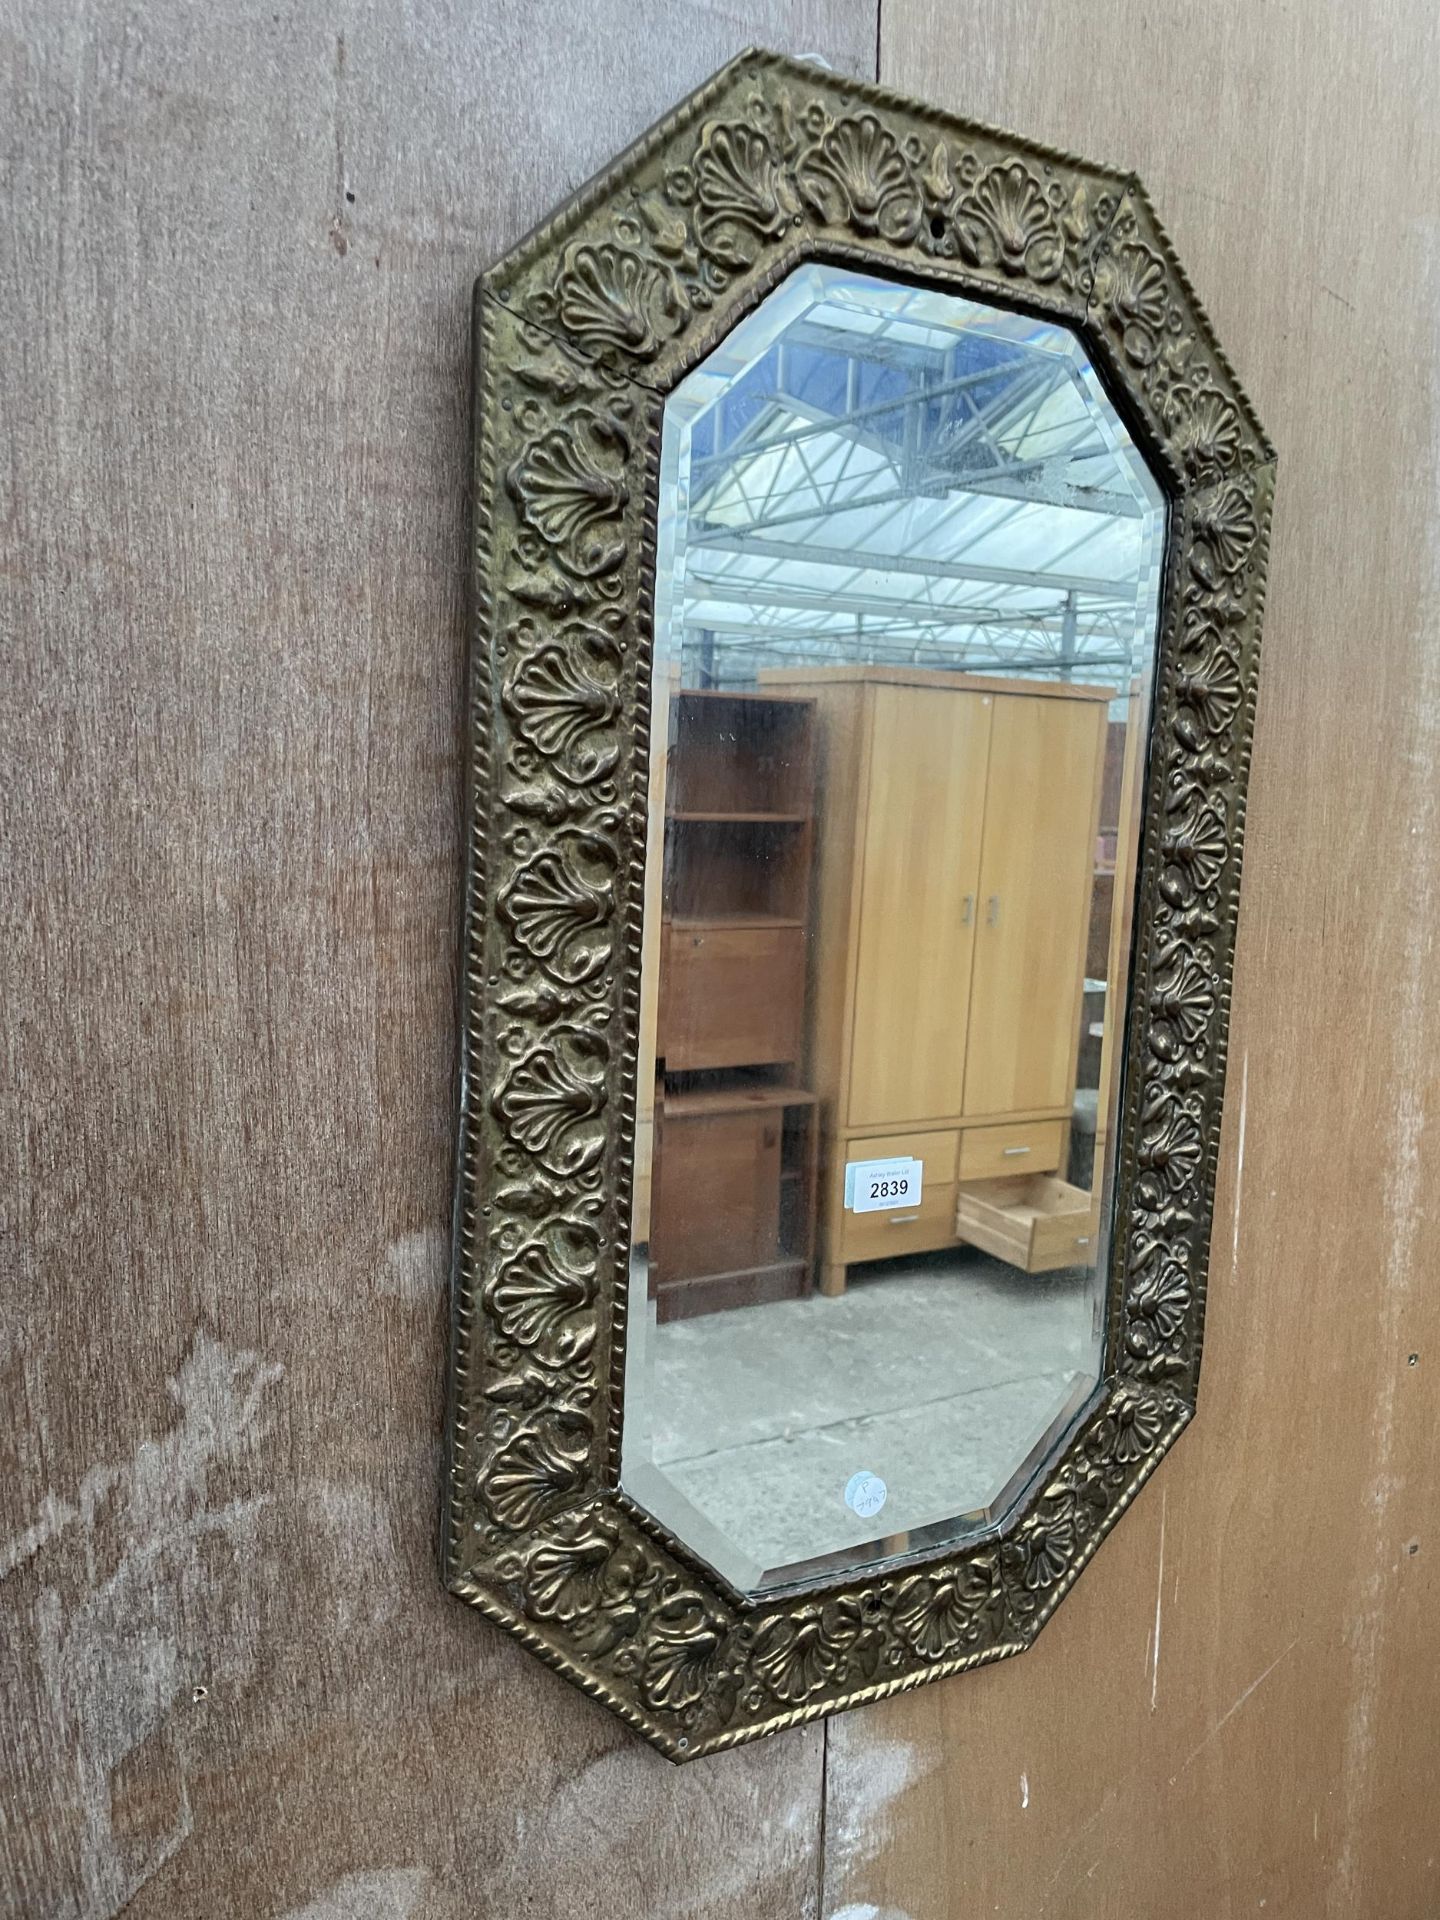 AN EMBOSSED BRASS WALL MIRROR